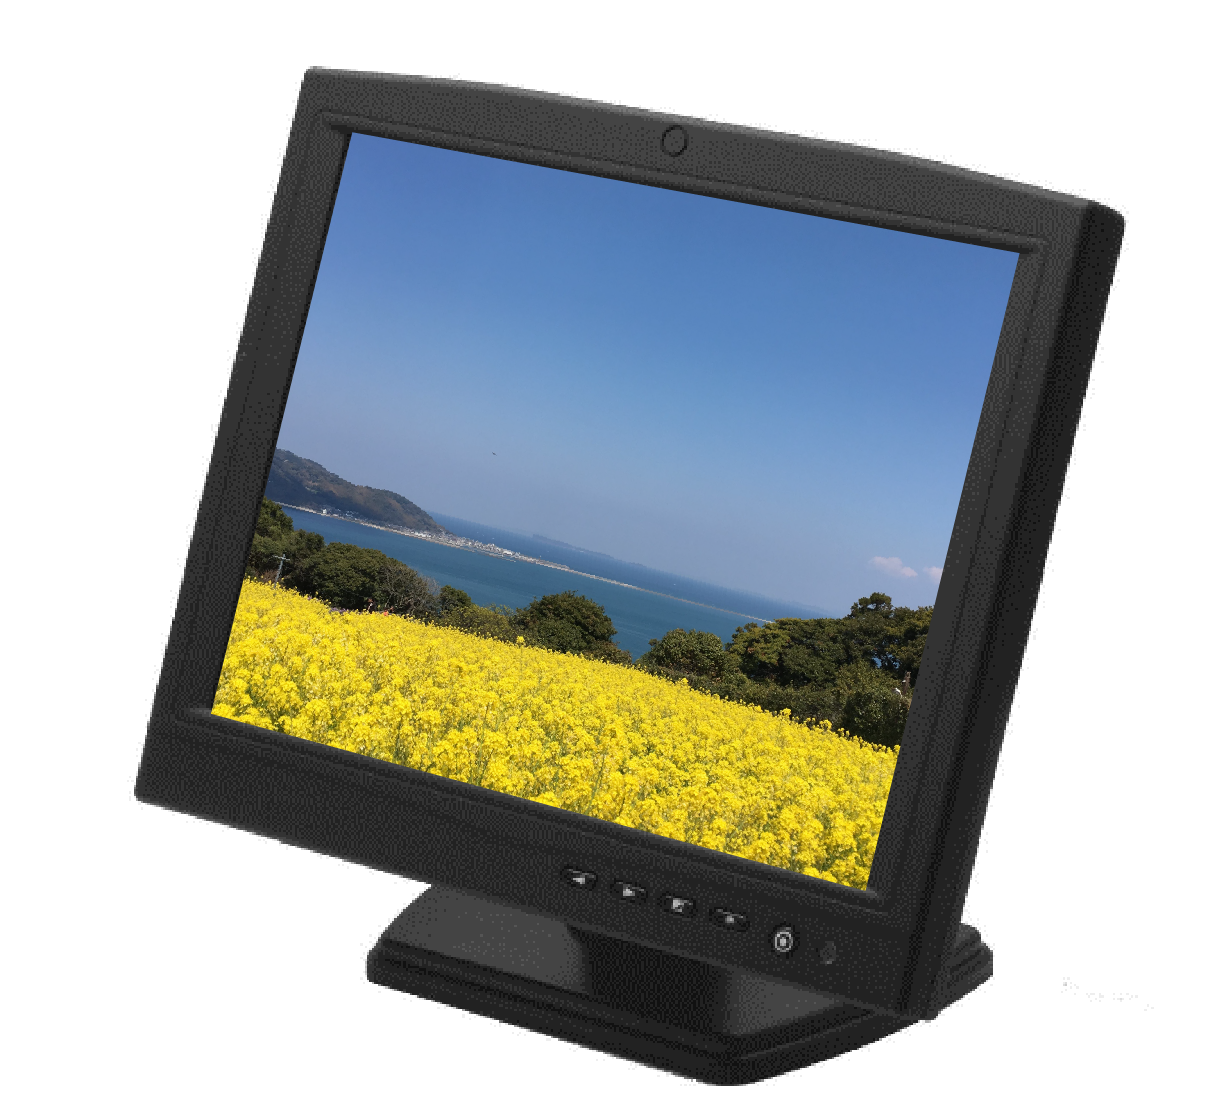 SEF104A-L is an industrial touch monitor which can be used to any kinds of vehicles.